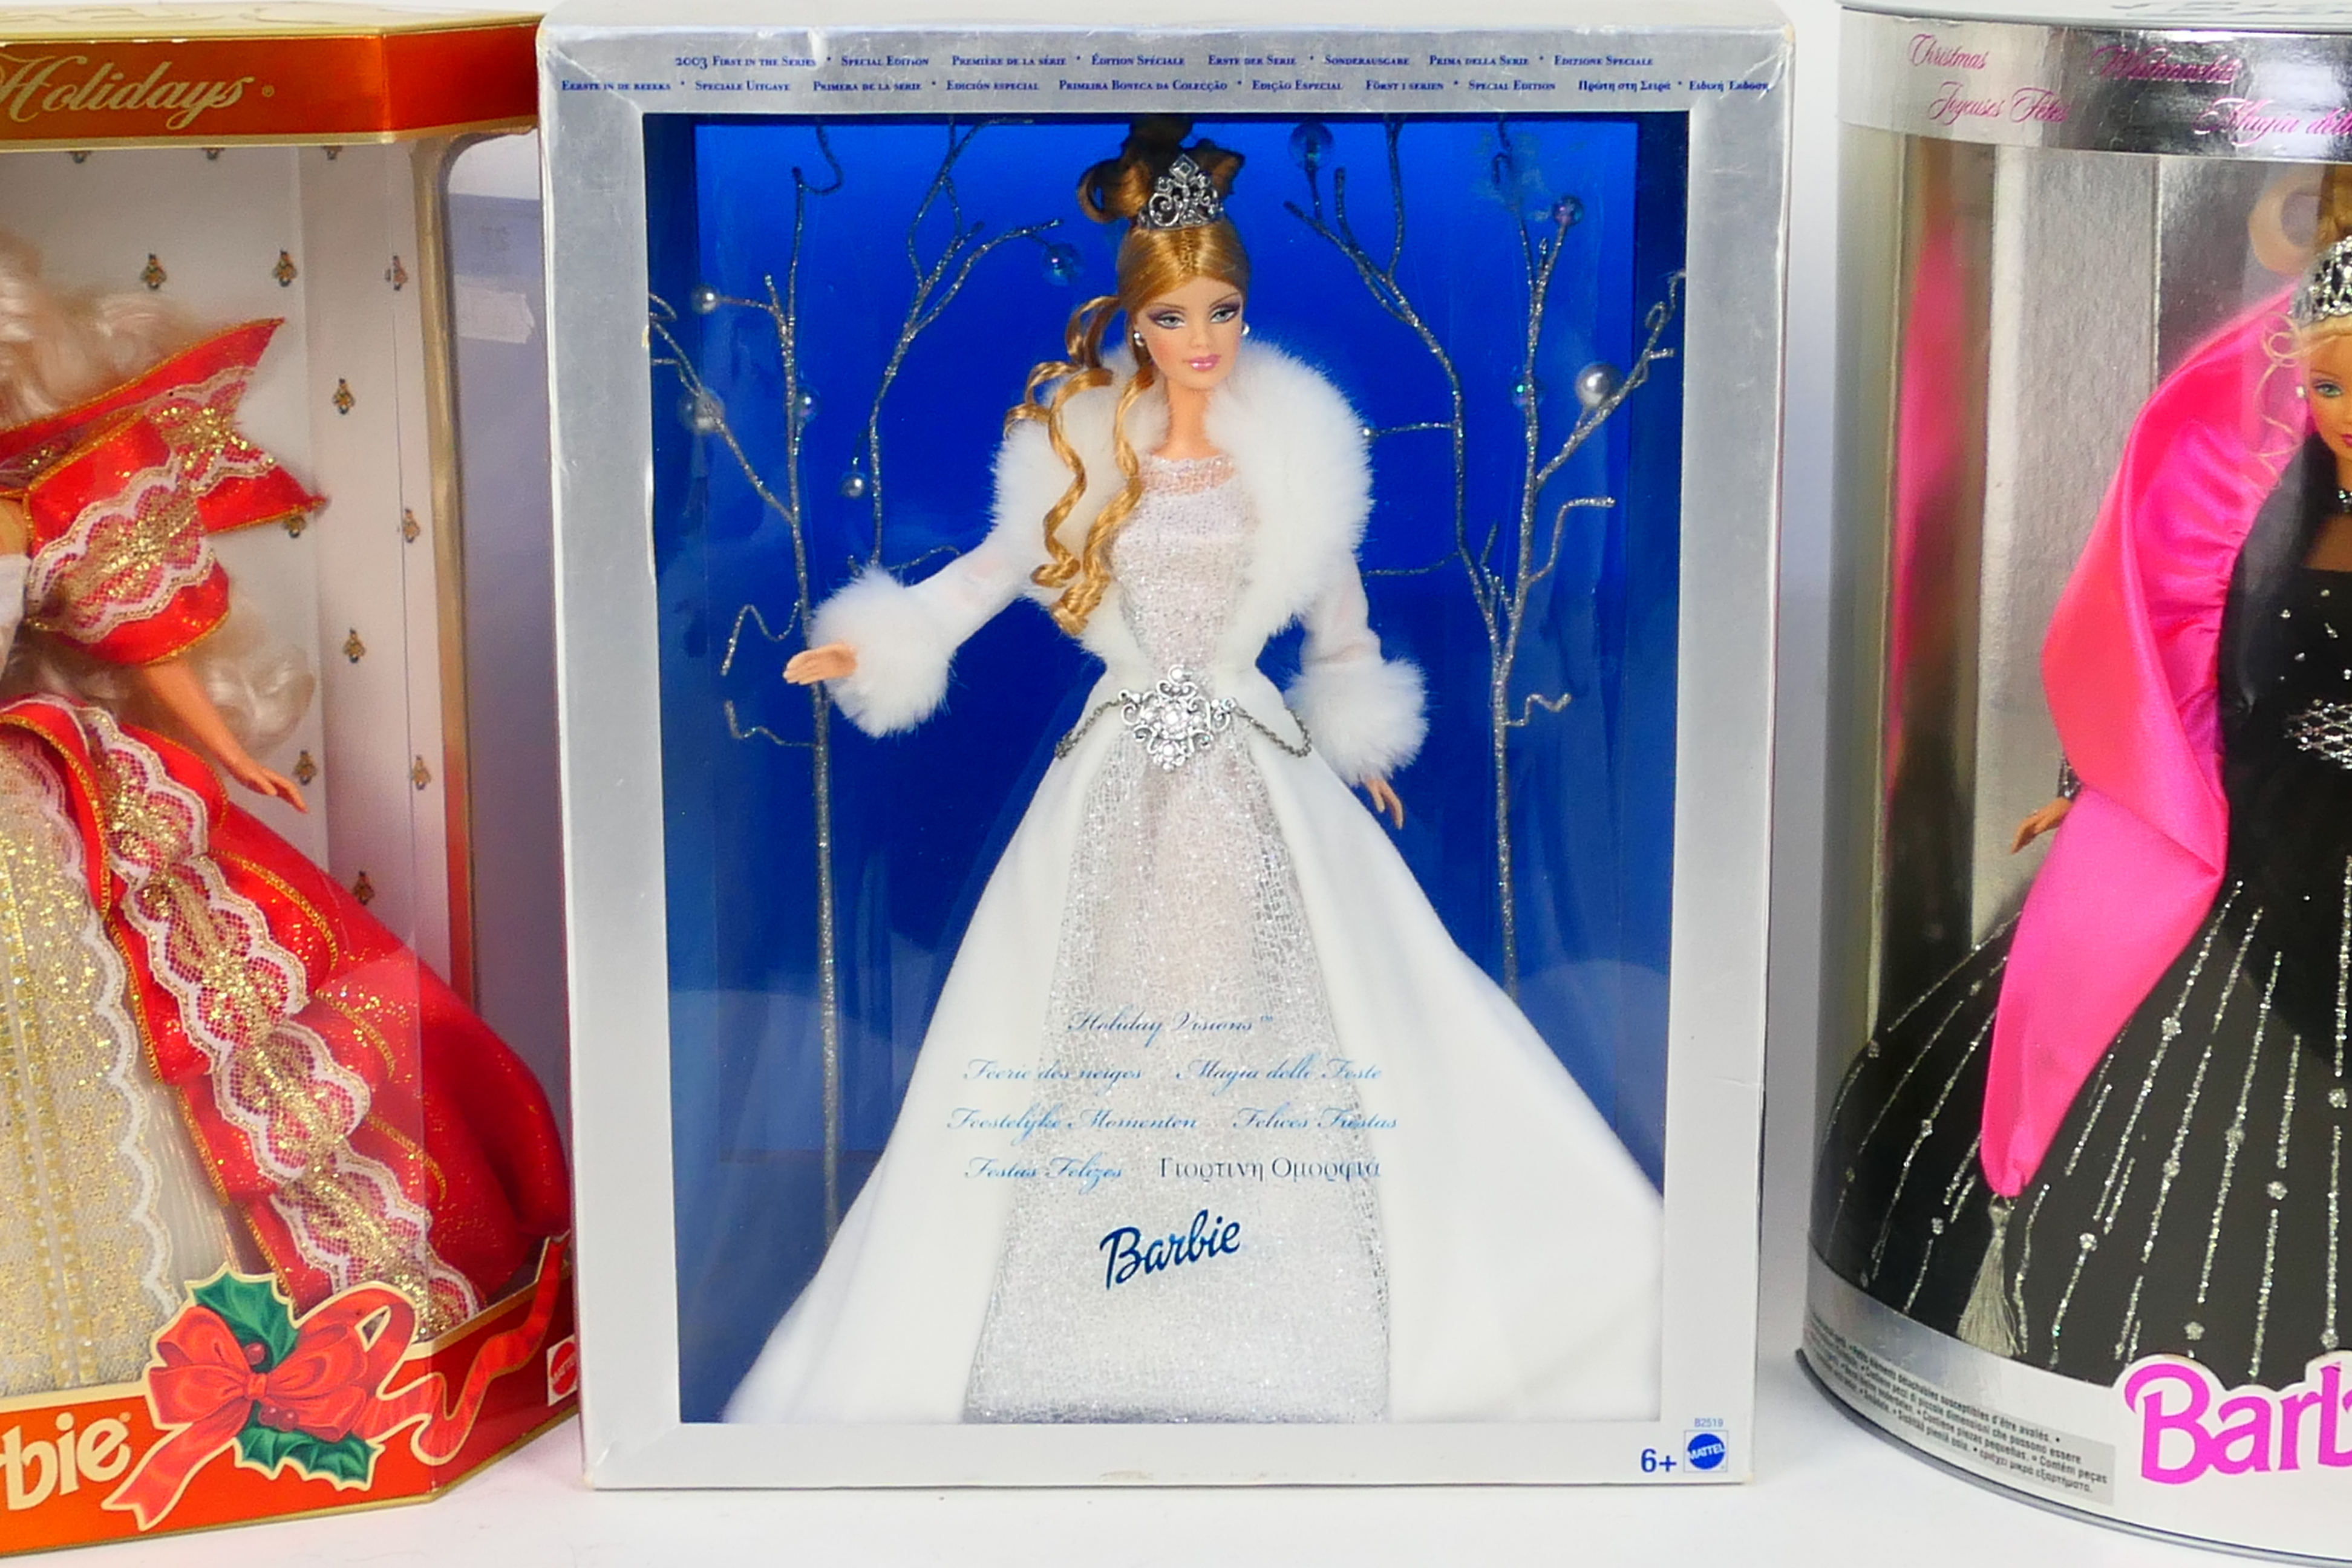 Mattel - Barbie - 3 x boxed special edition dolls, Happy Holidays 10th Anniversary from 1997, - Image 3 of 5